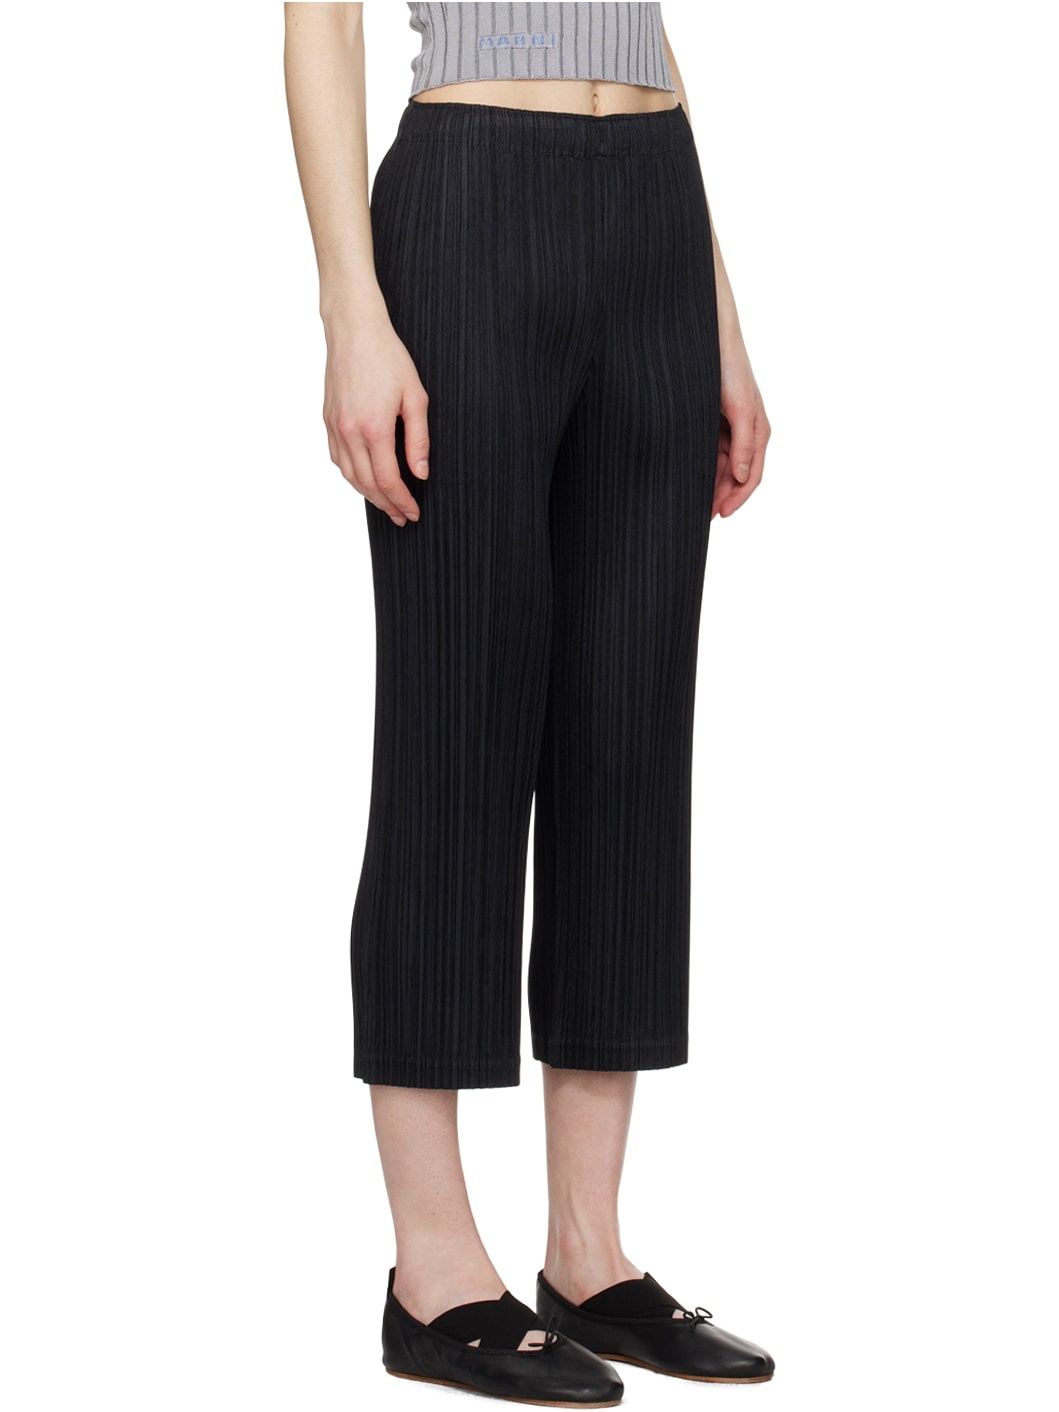 Black Thicker Bottom 2 Trousers - 2